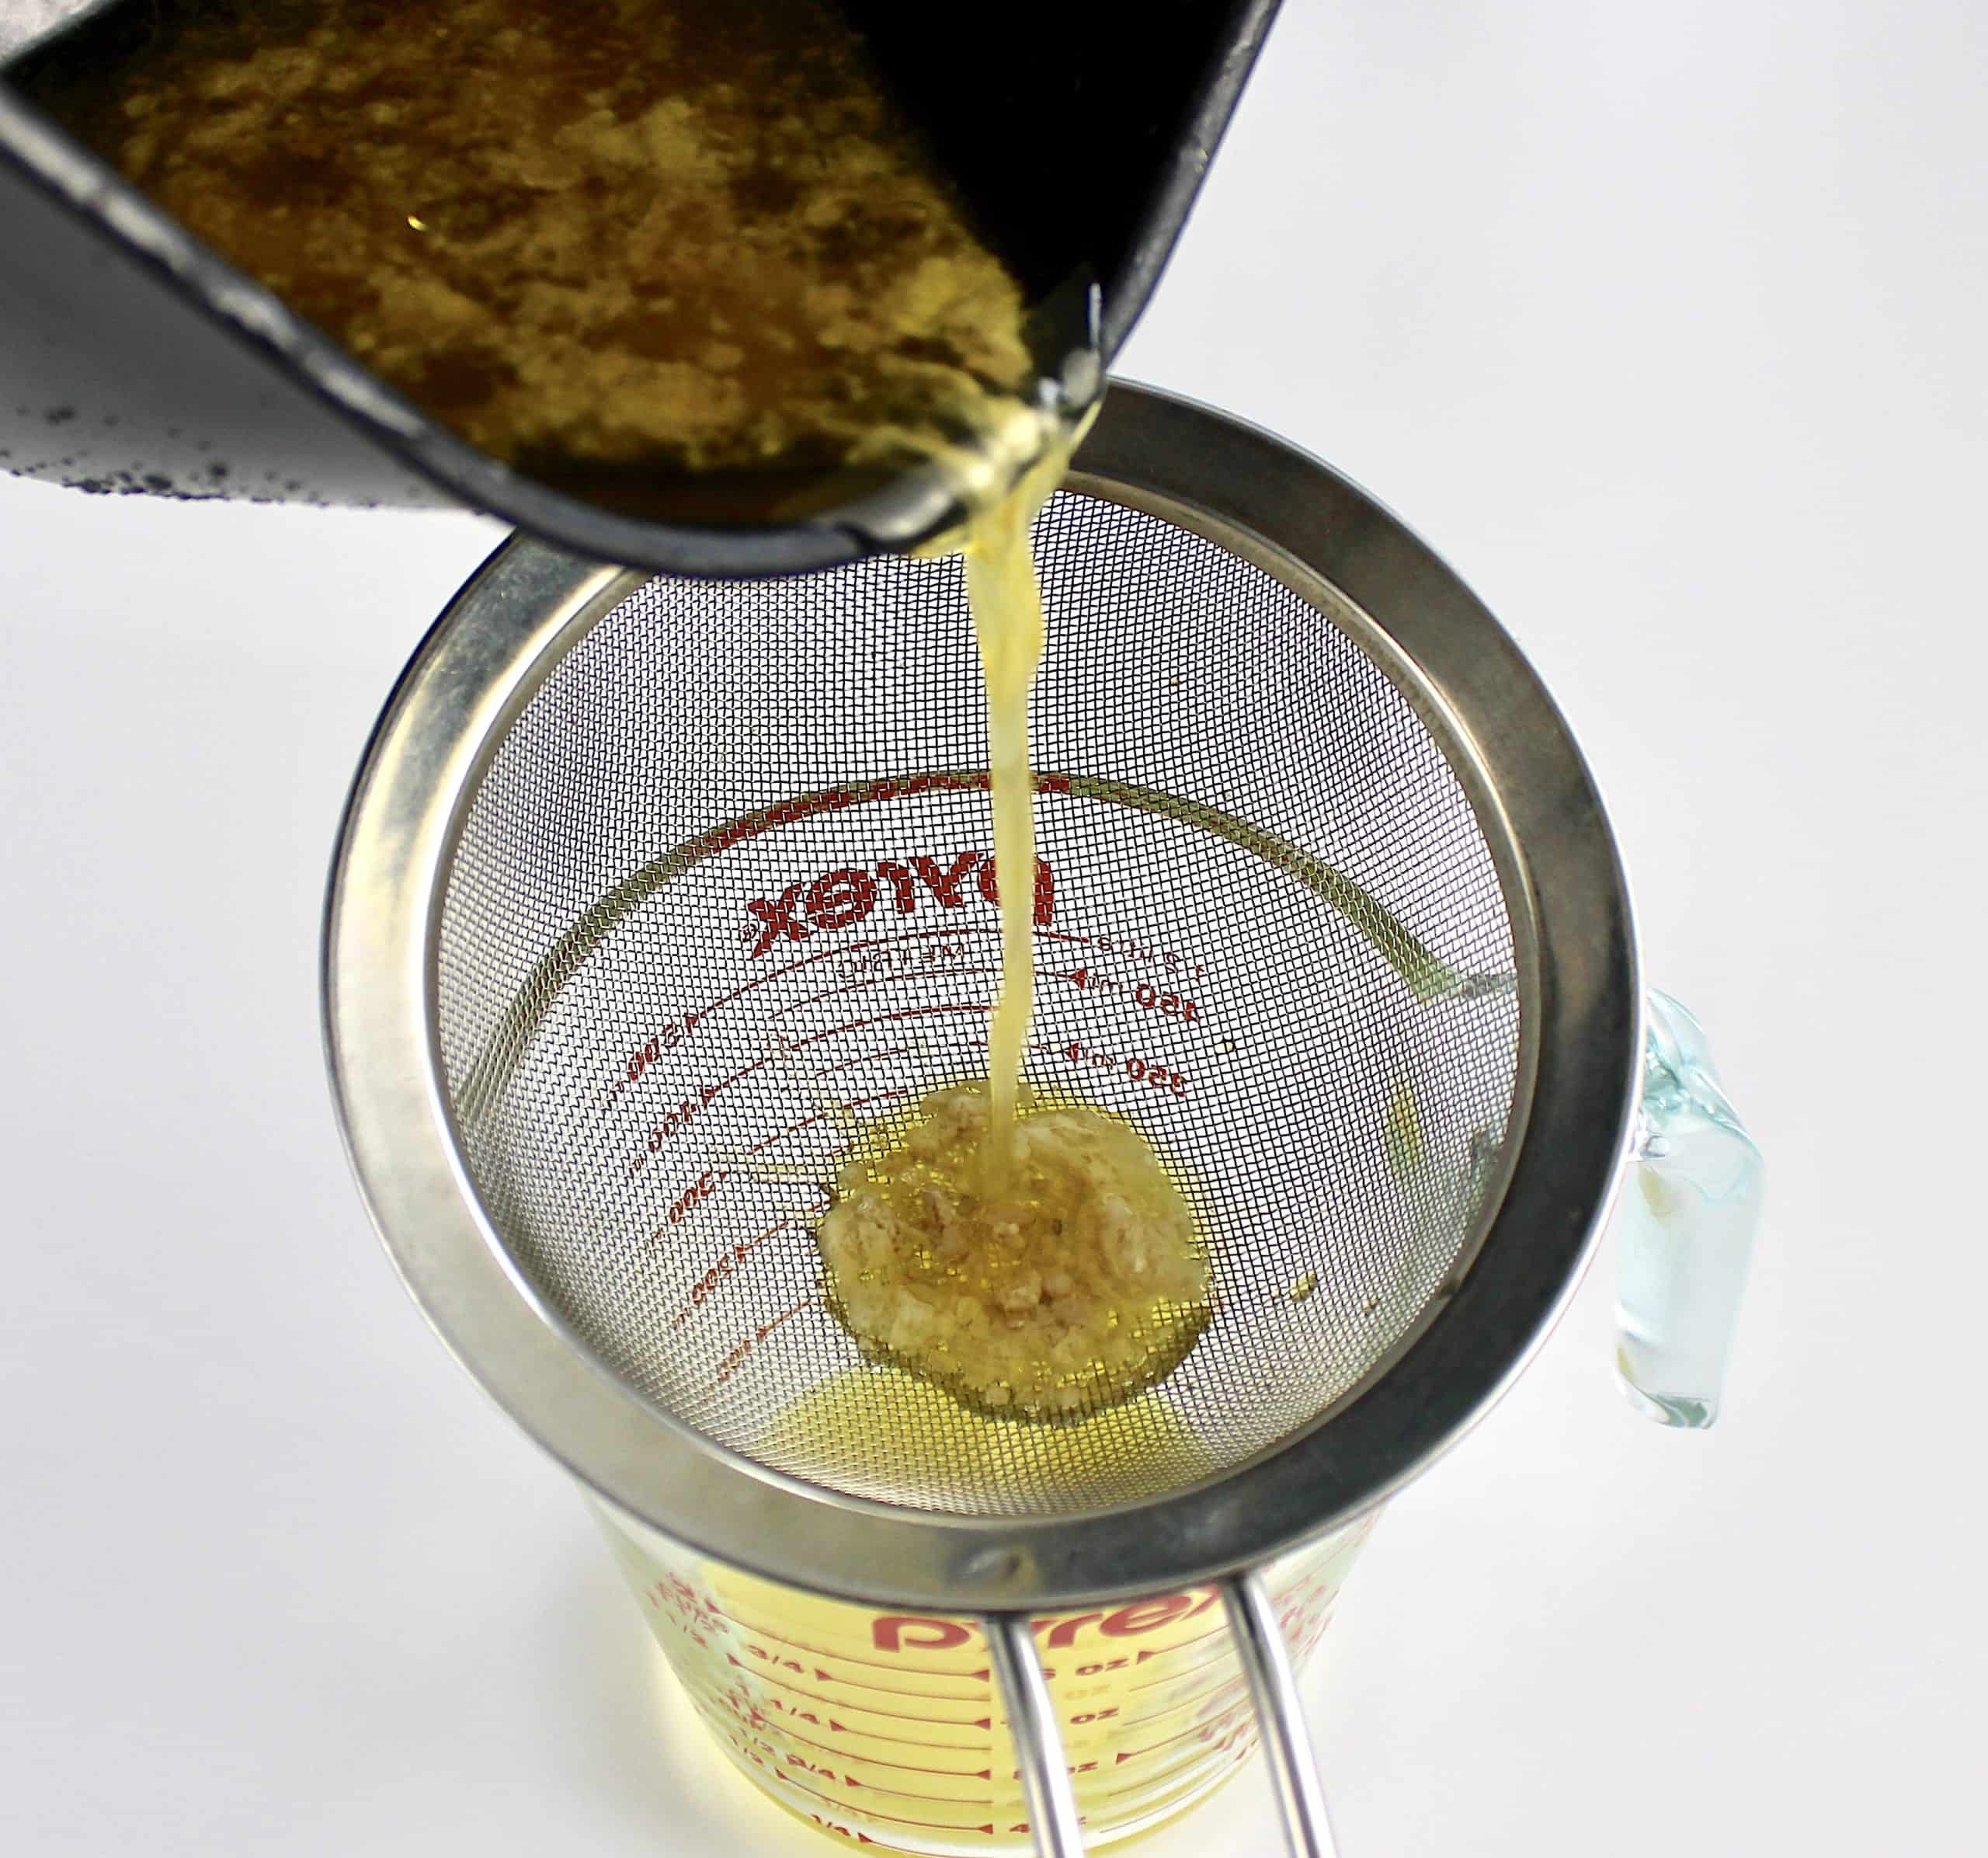 turkey drippings being strained into glass measure cup